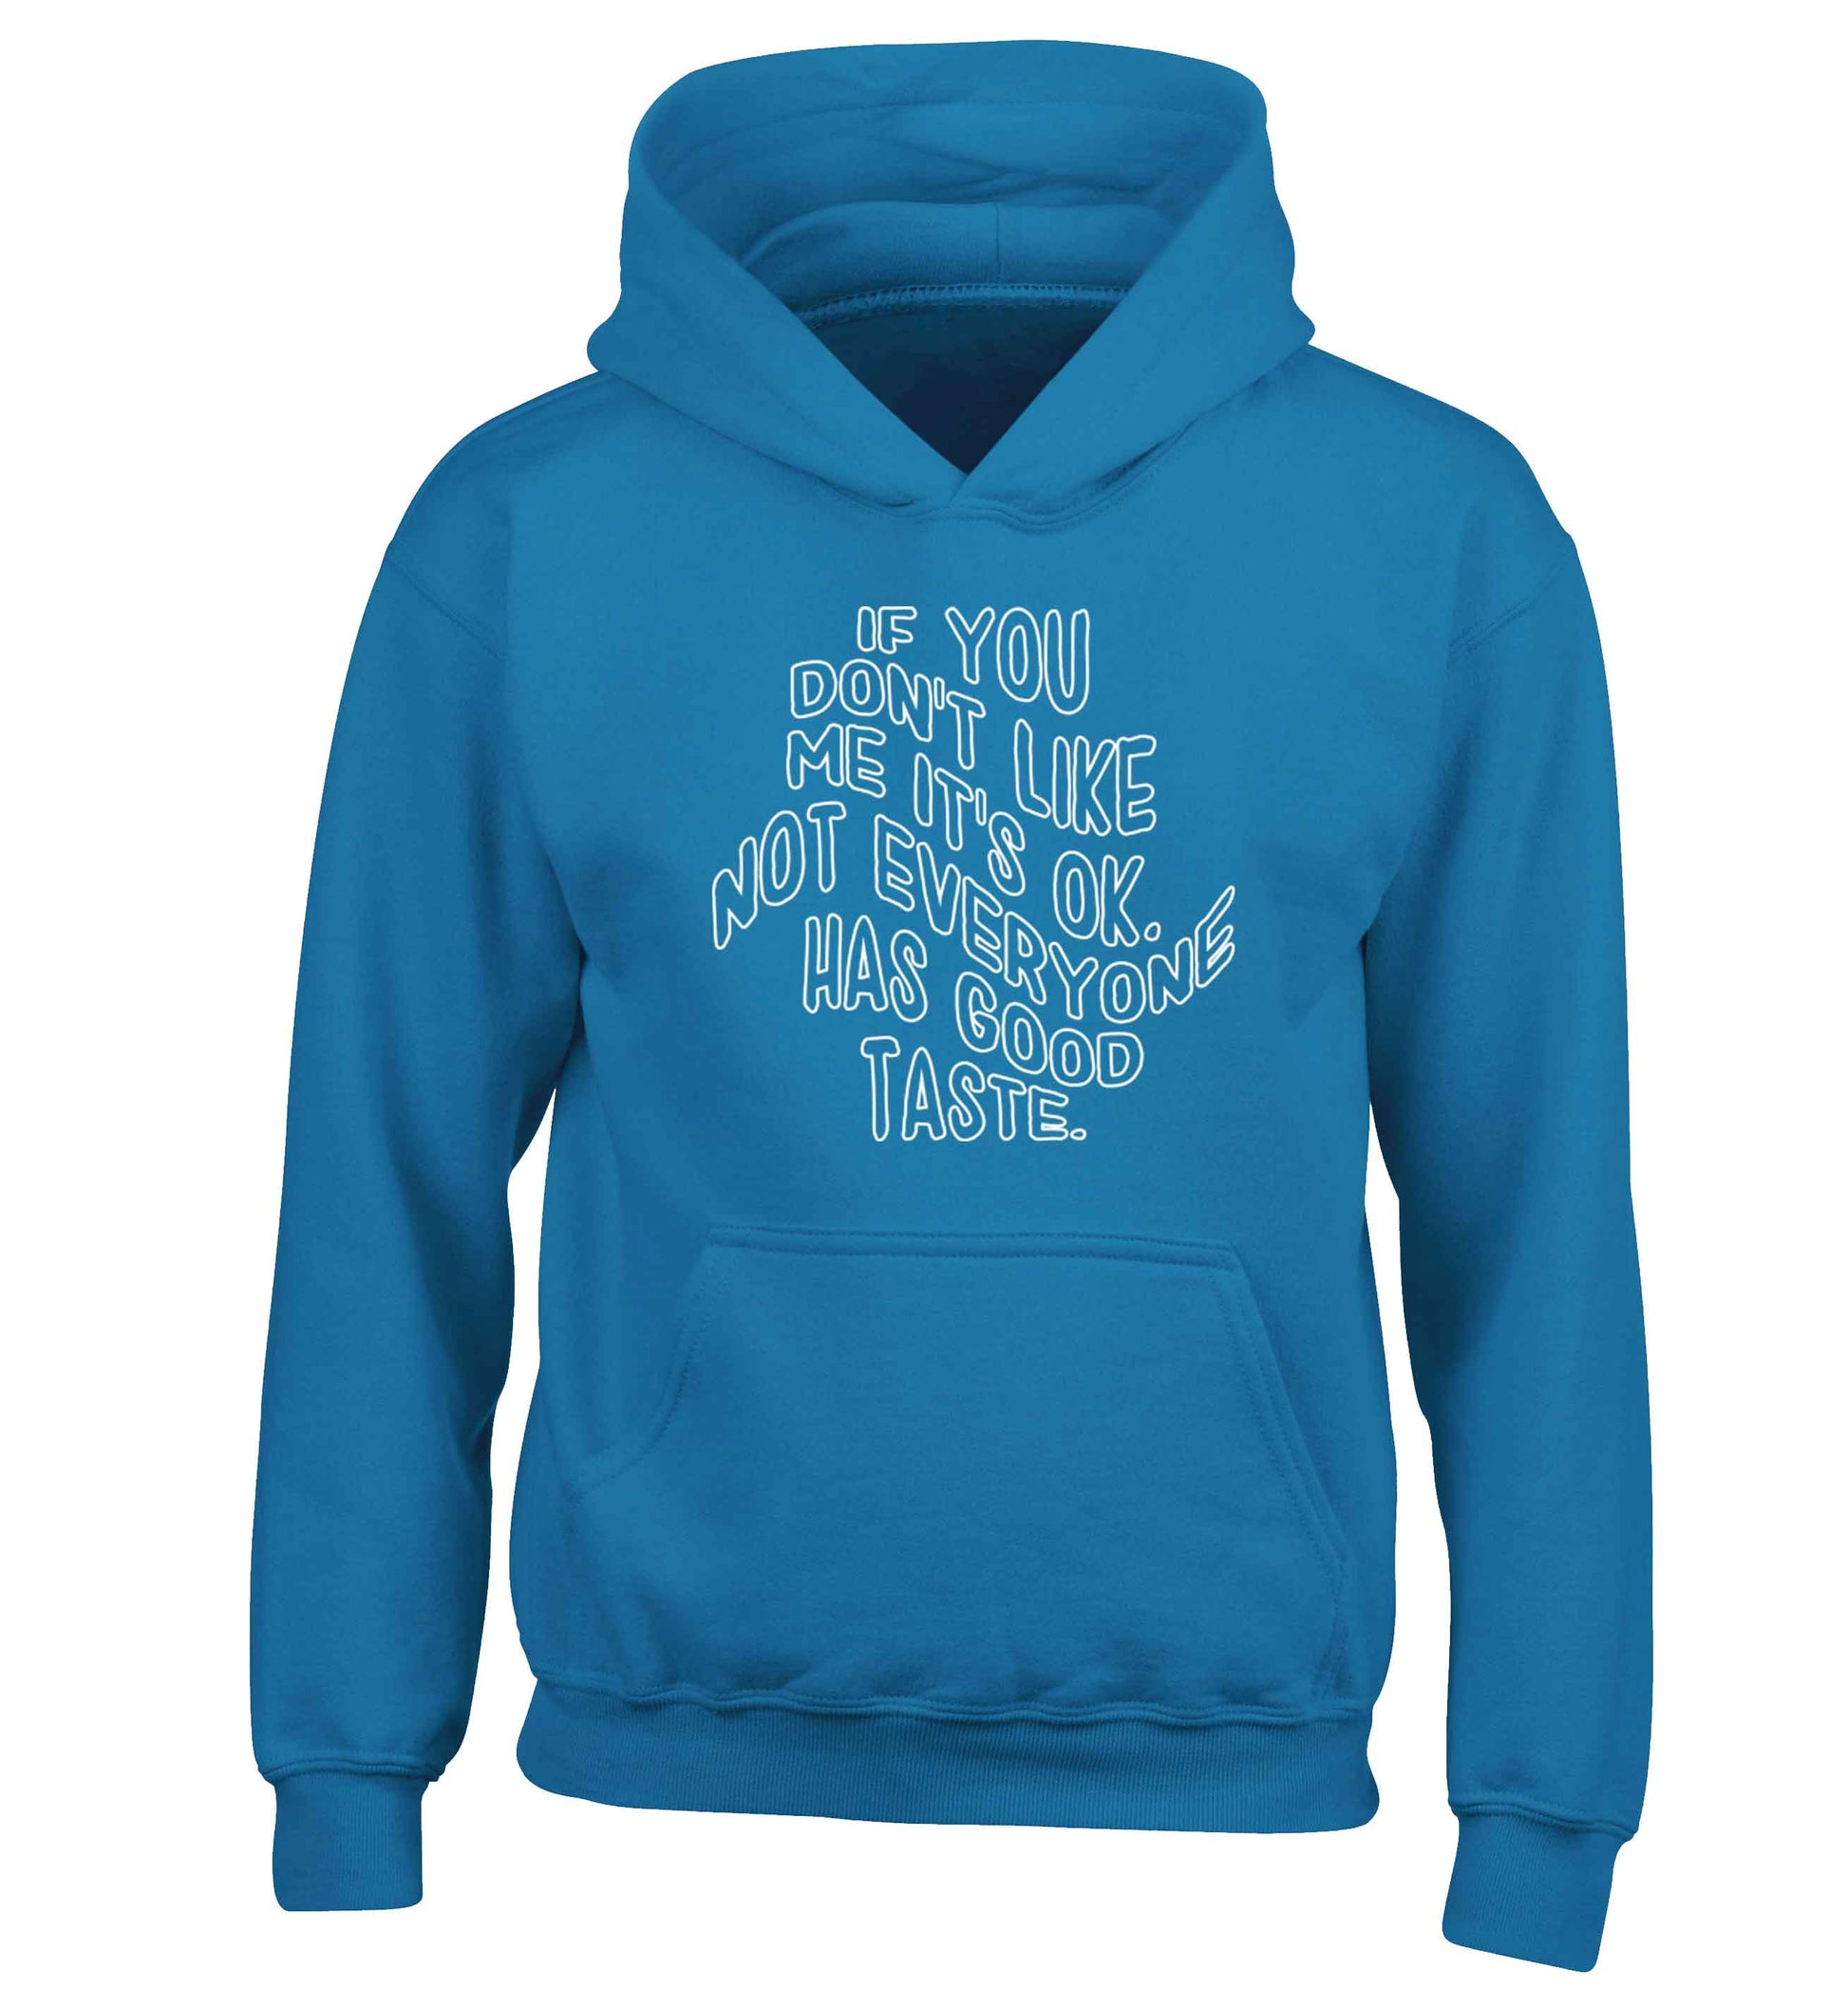 If you don't like me it's ok not everyone has good taste children's blue hoodie 12-13 Years